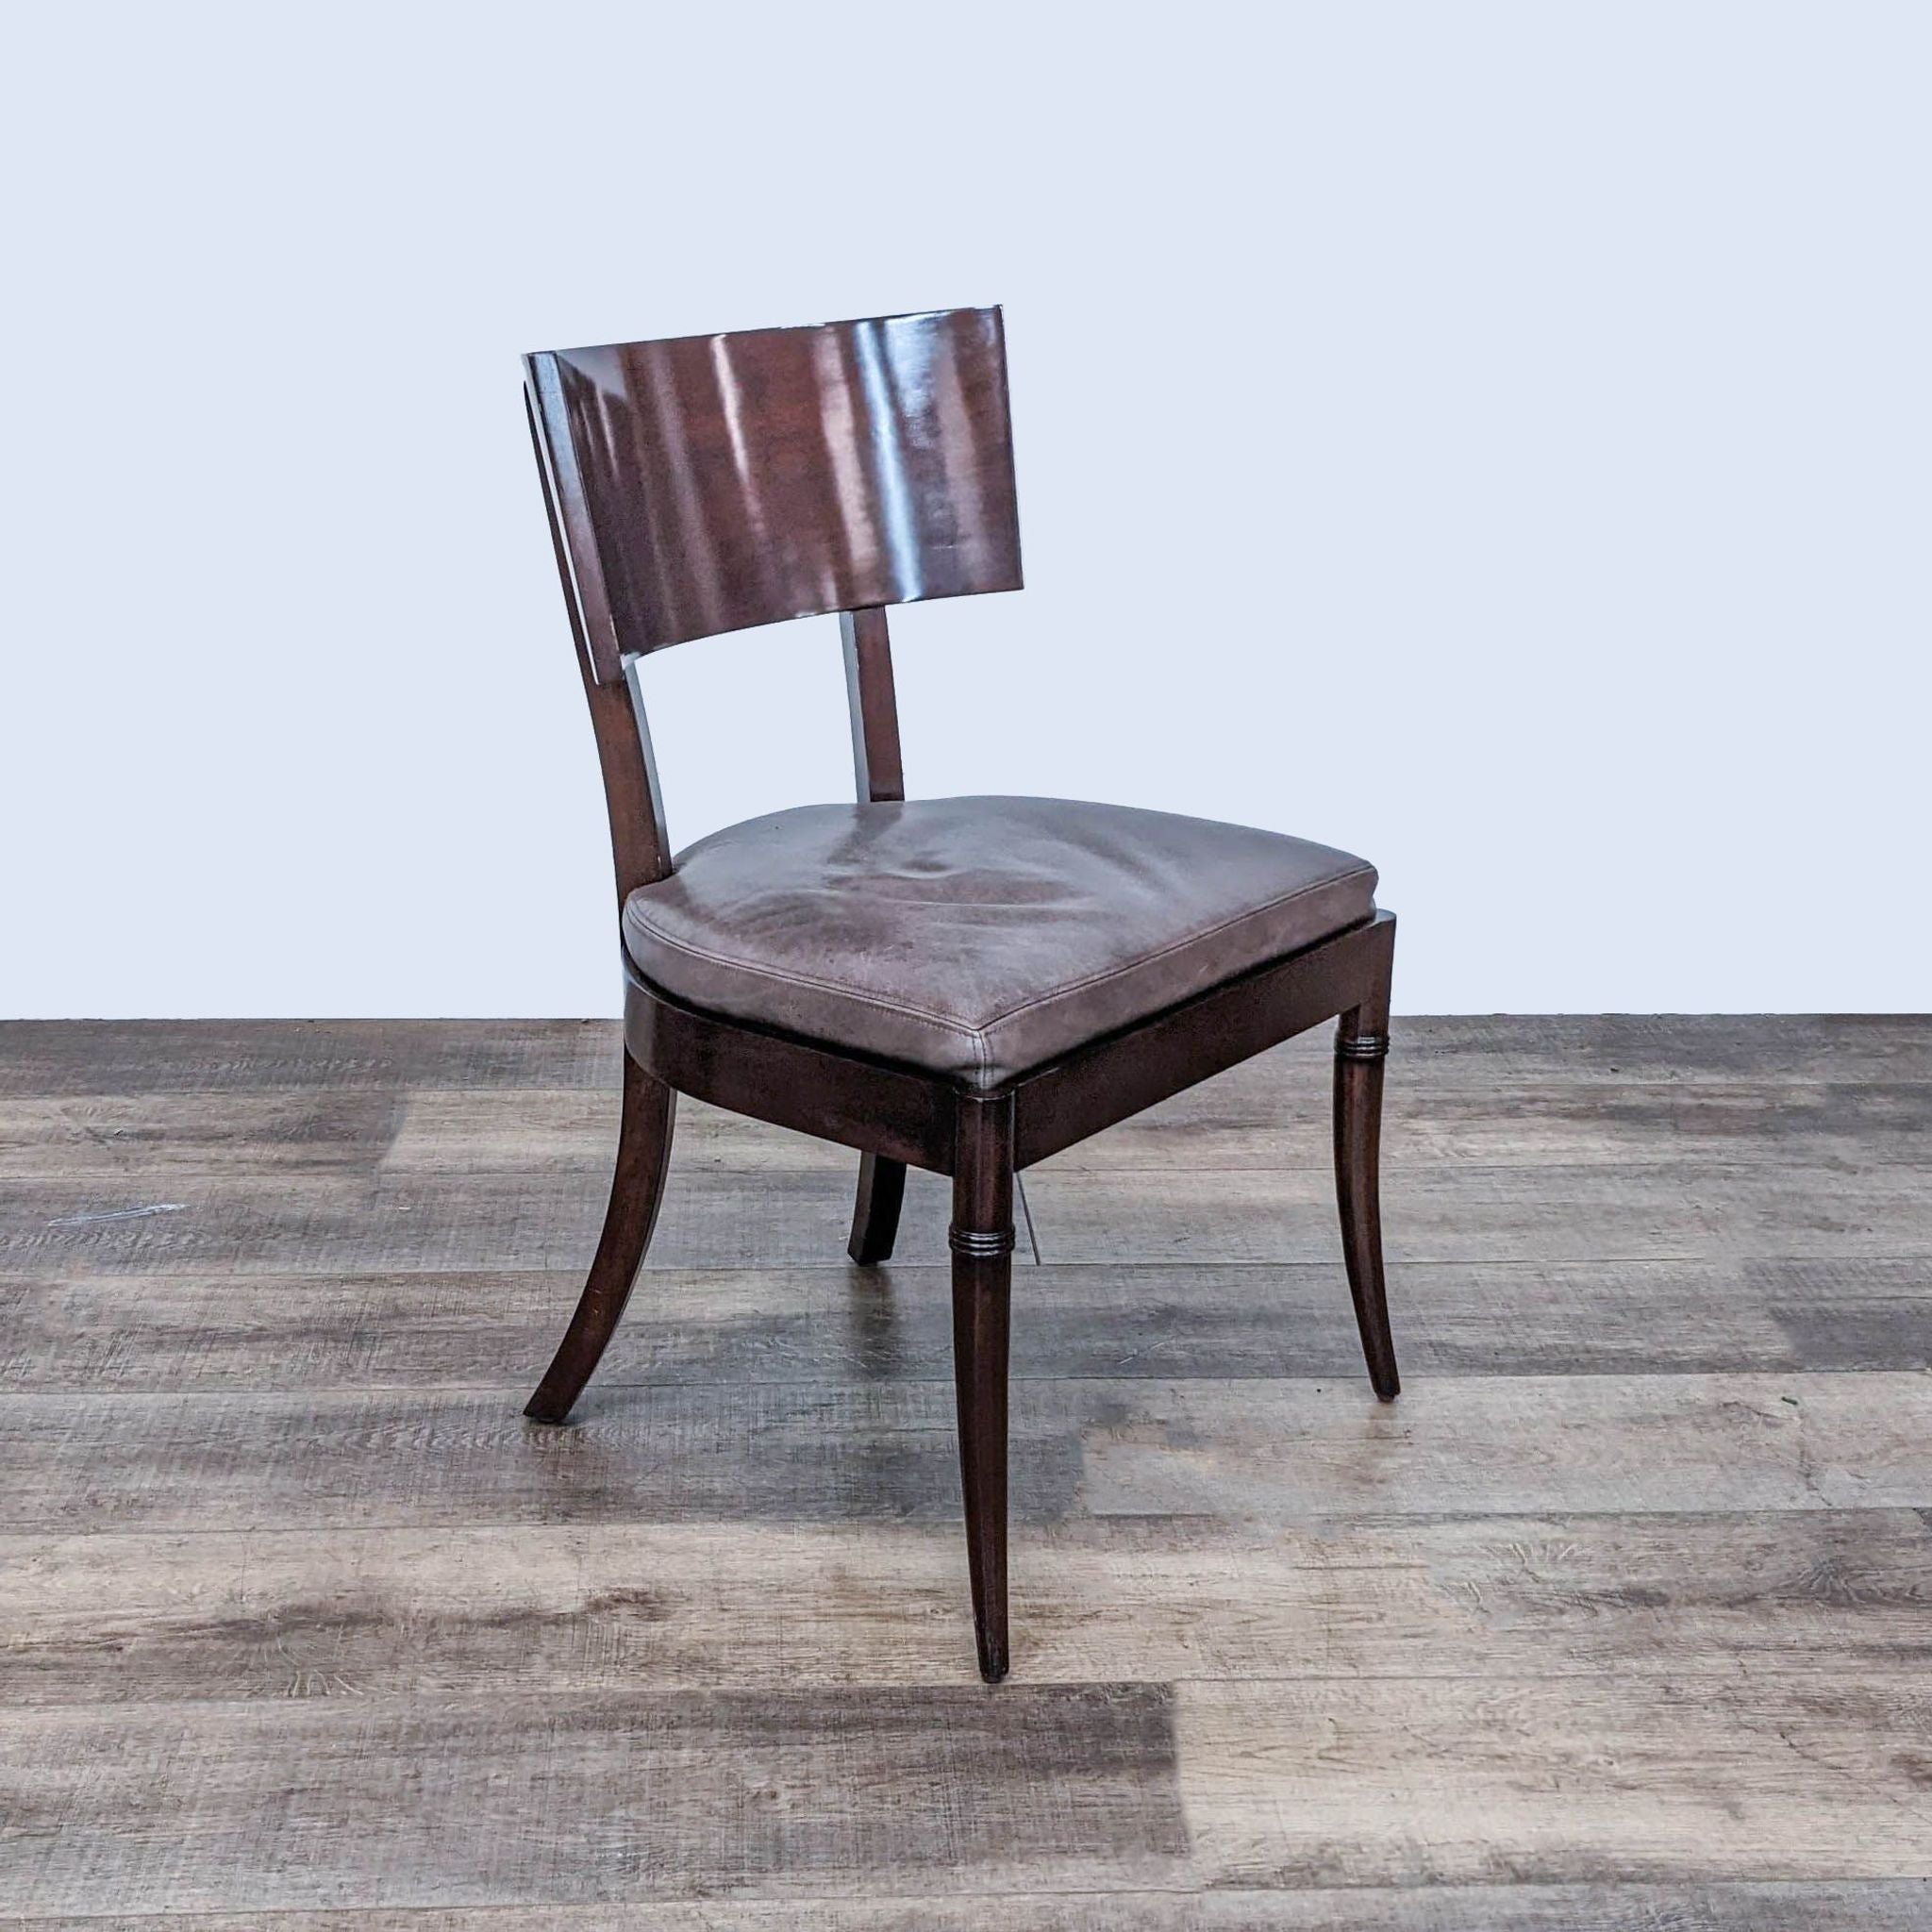 Williams Sonoma Home dining chair with wood scoop back and leather upholstered seat, on wooden floor.